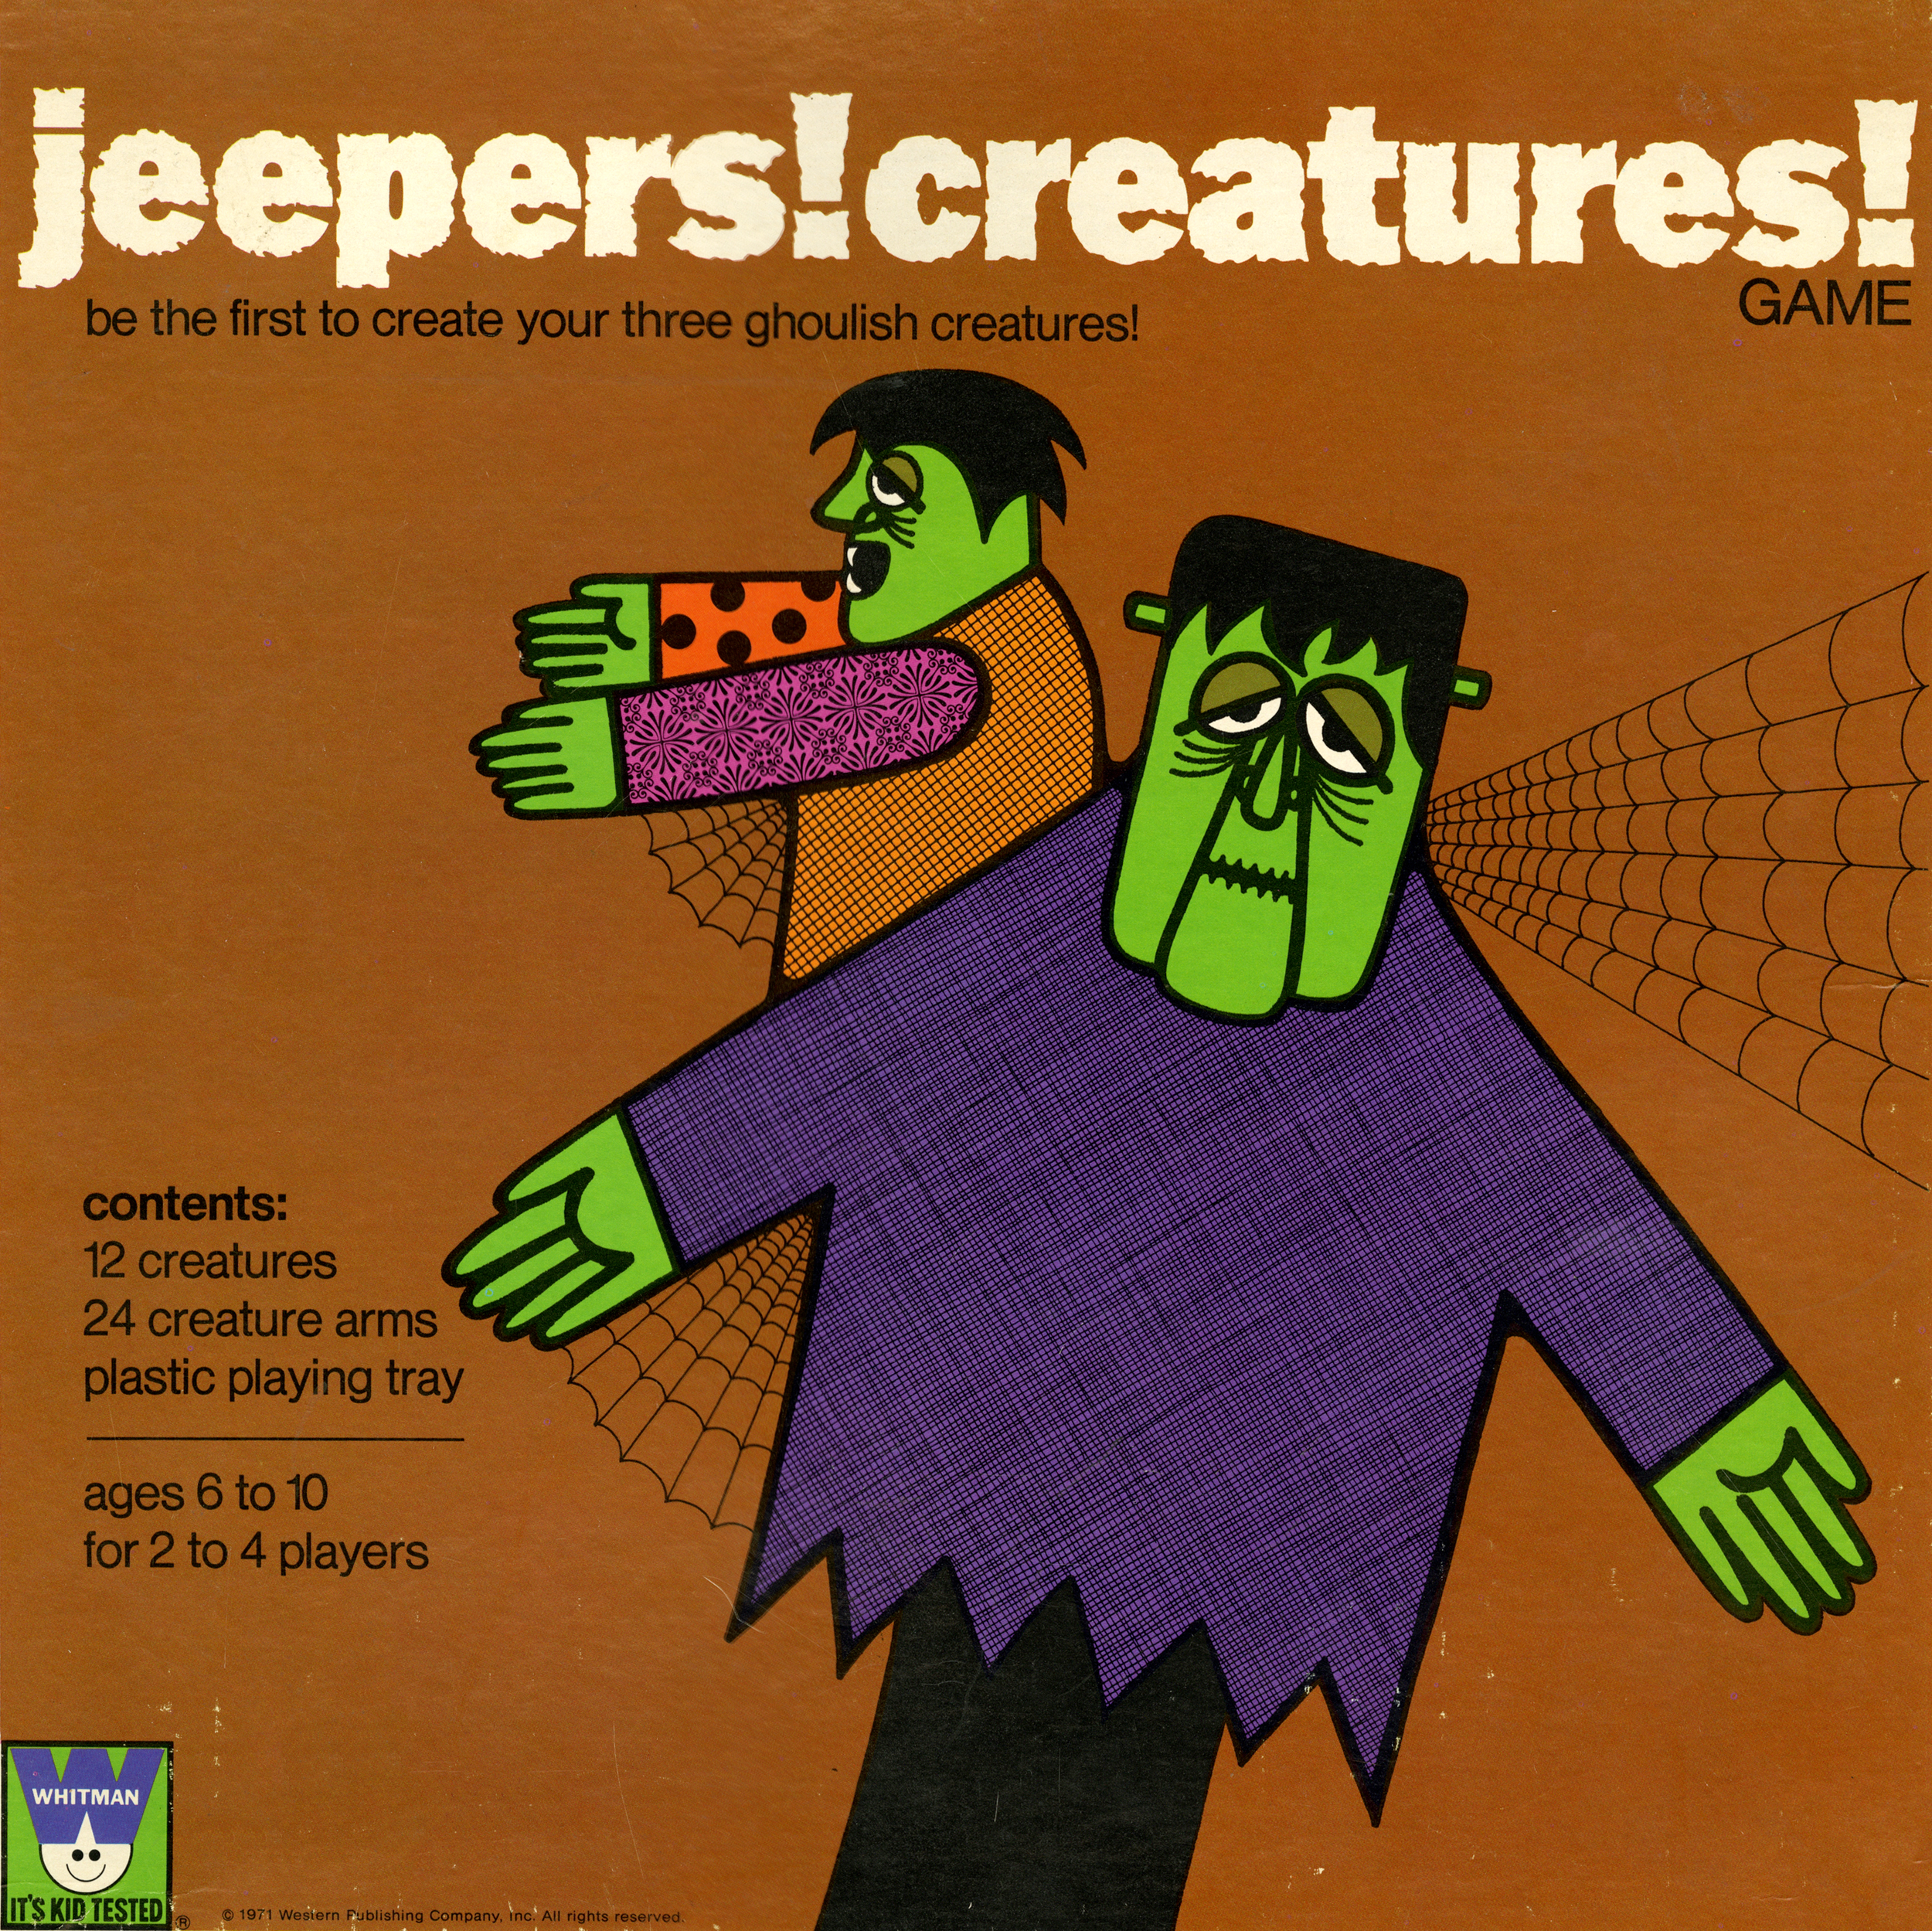 jeepers-creatures-1.png